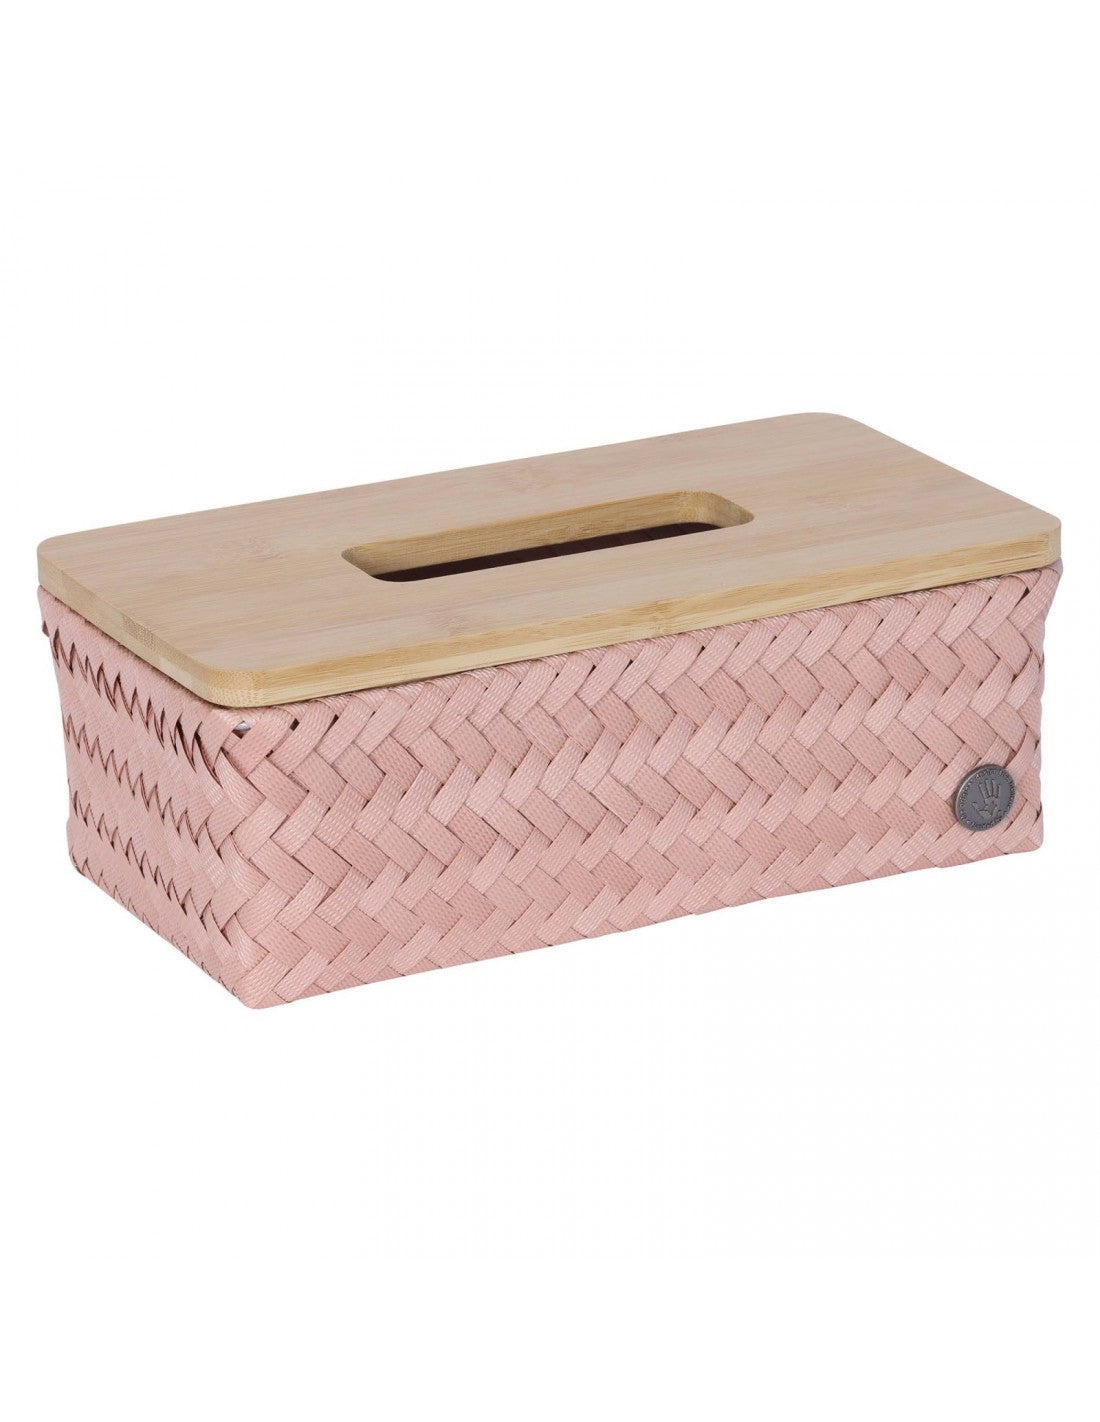 Top fit tissue box with bamboo cover - copper blush | Handed By